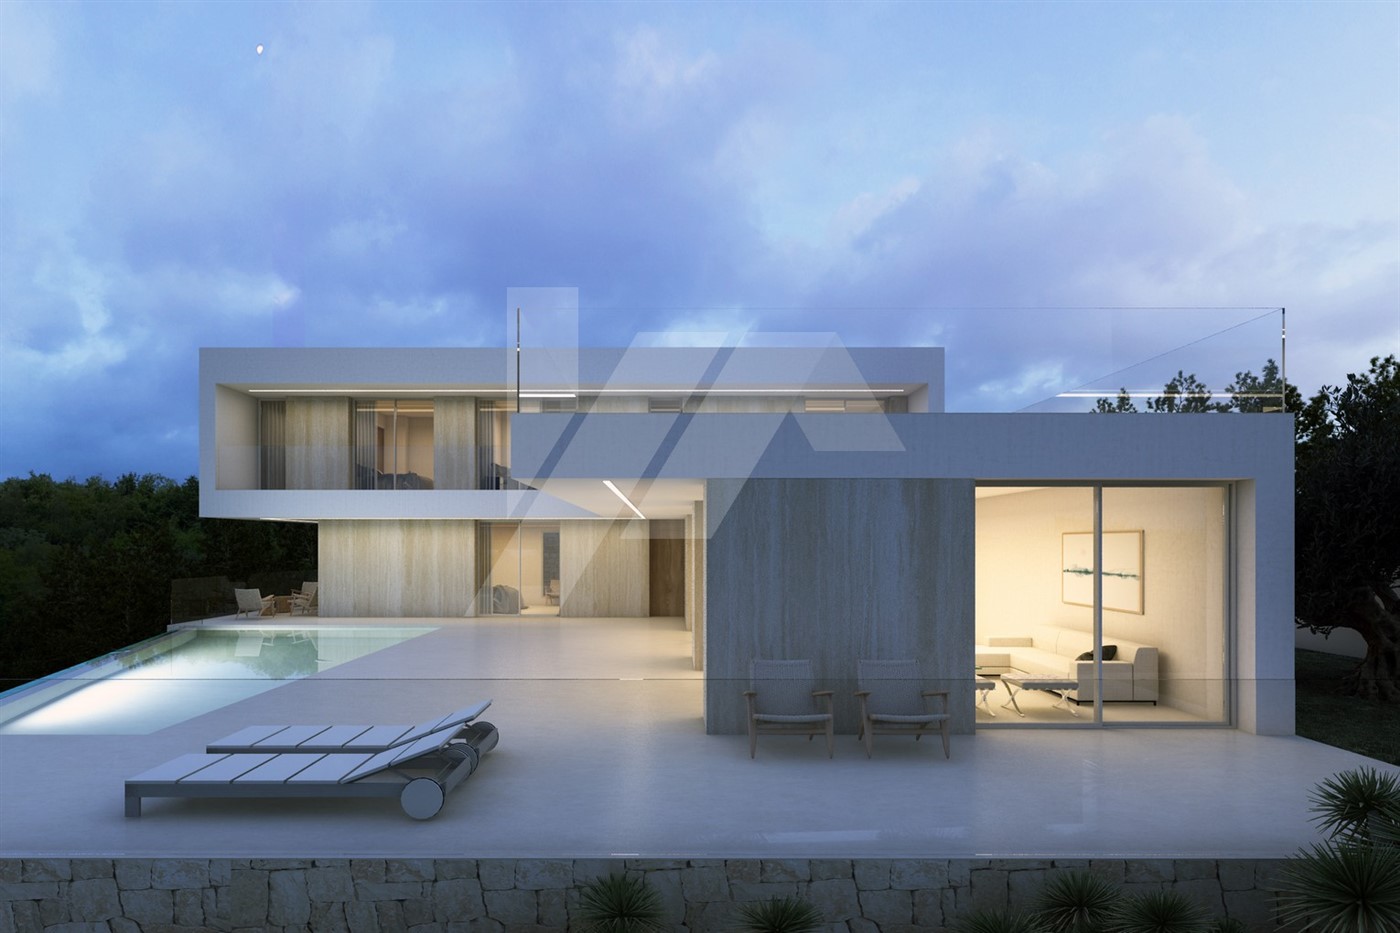 New Project for Sale in Benissa, Costa Blanca.